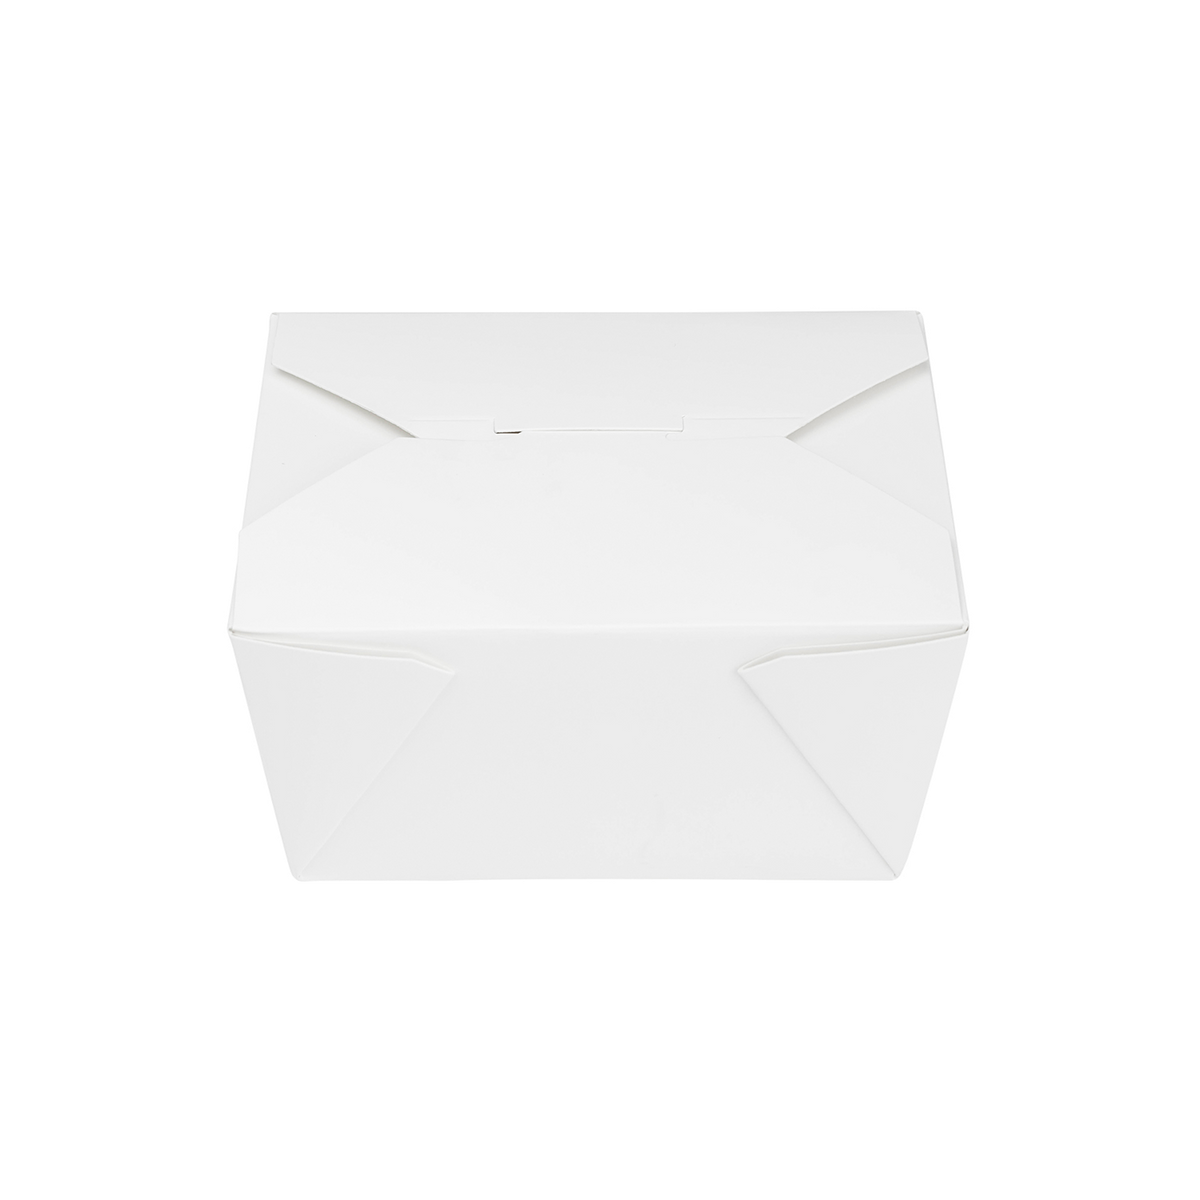 https://www.restaurantsupplydrops.shop/wp-content/uploads/1689/34/we-have-the-best-prices-and-premium-white-microwavable-folded-paper-1-takeout-boxes-karat-small-fold-to-go-container-30oz-4-3-x-3-5-x-2-4-450-count-karat-on-our-website_0.png